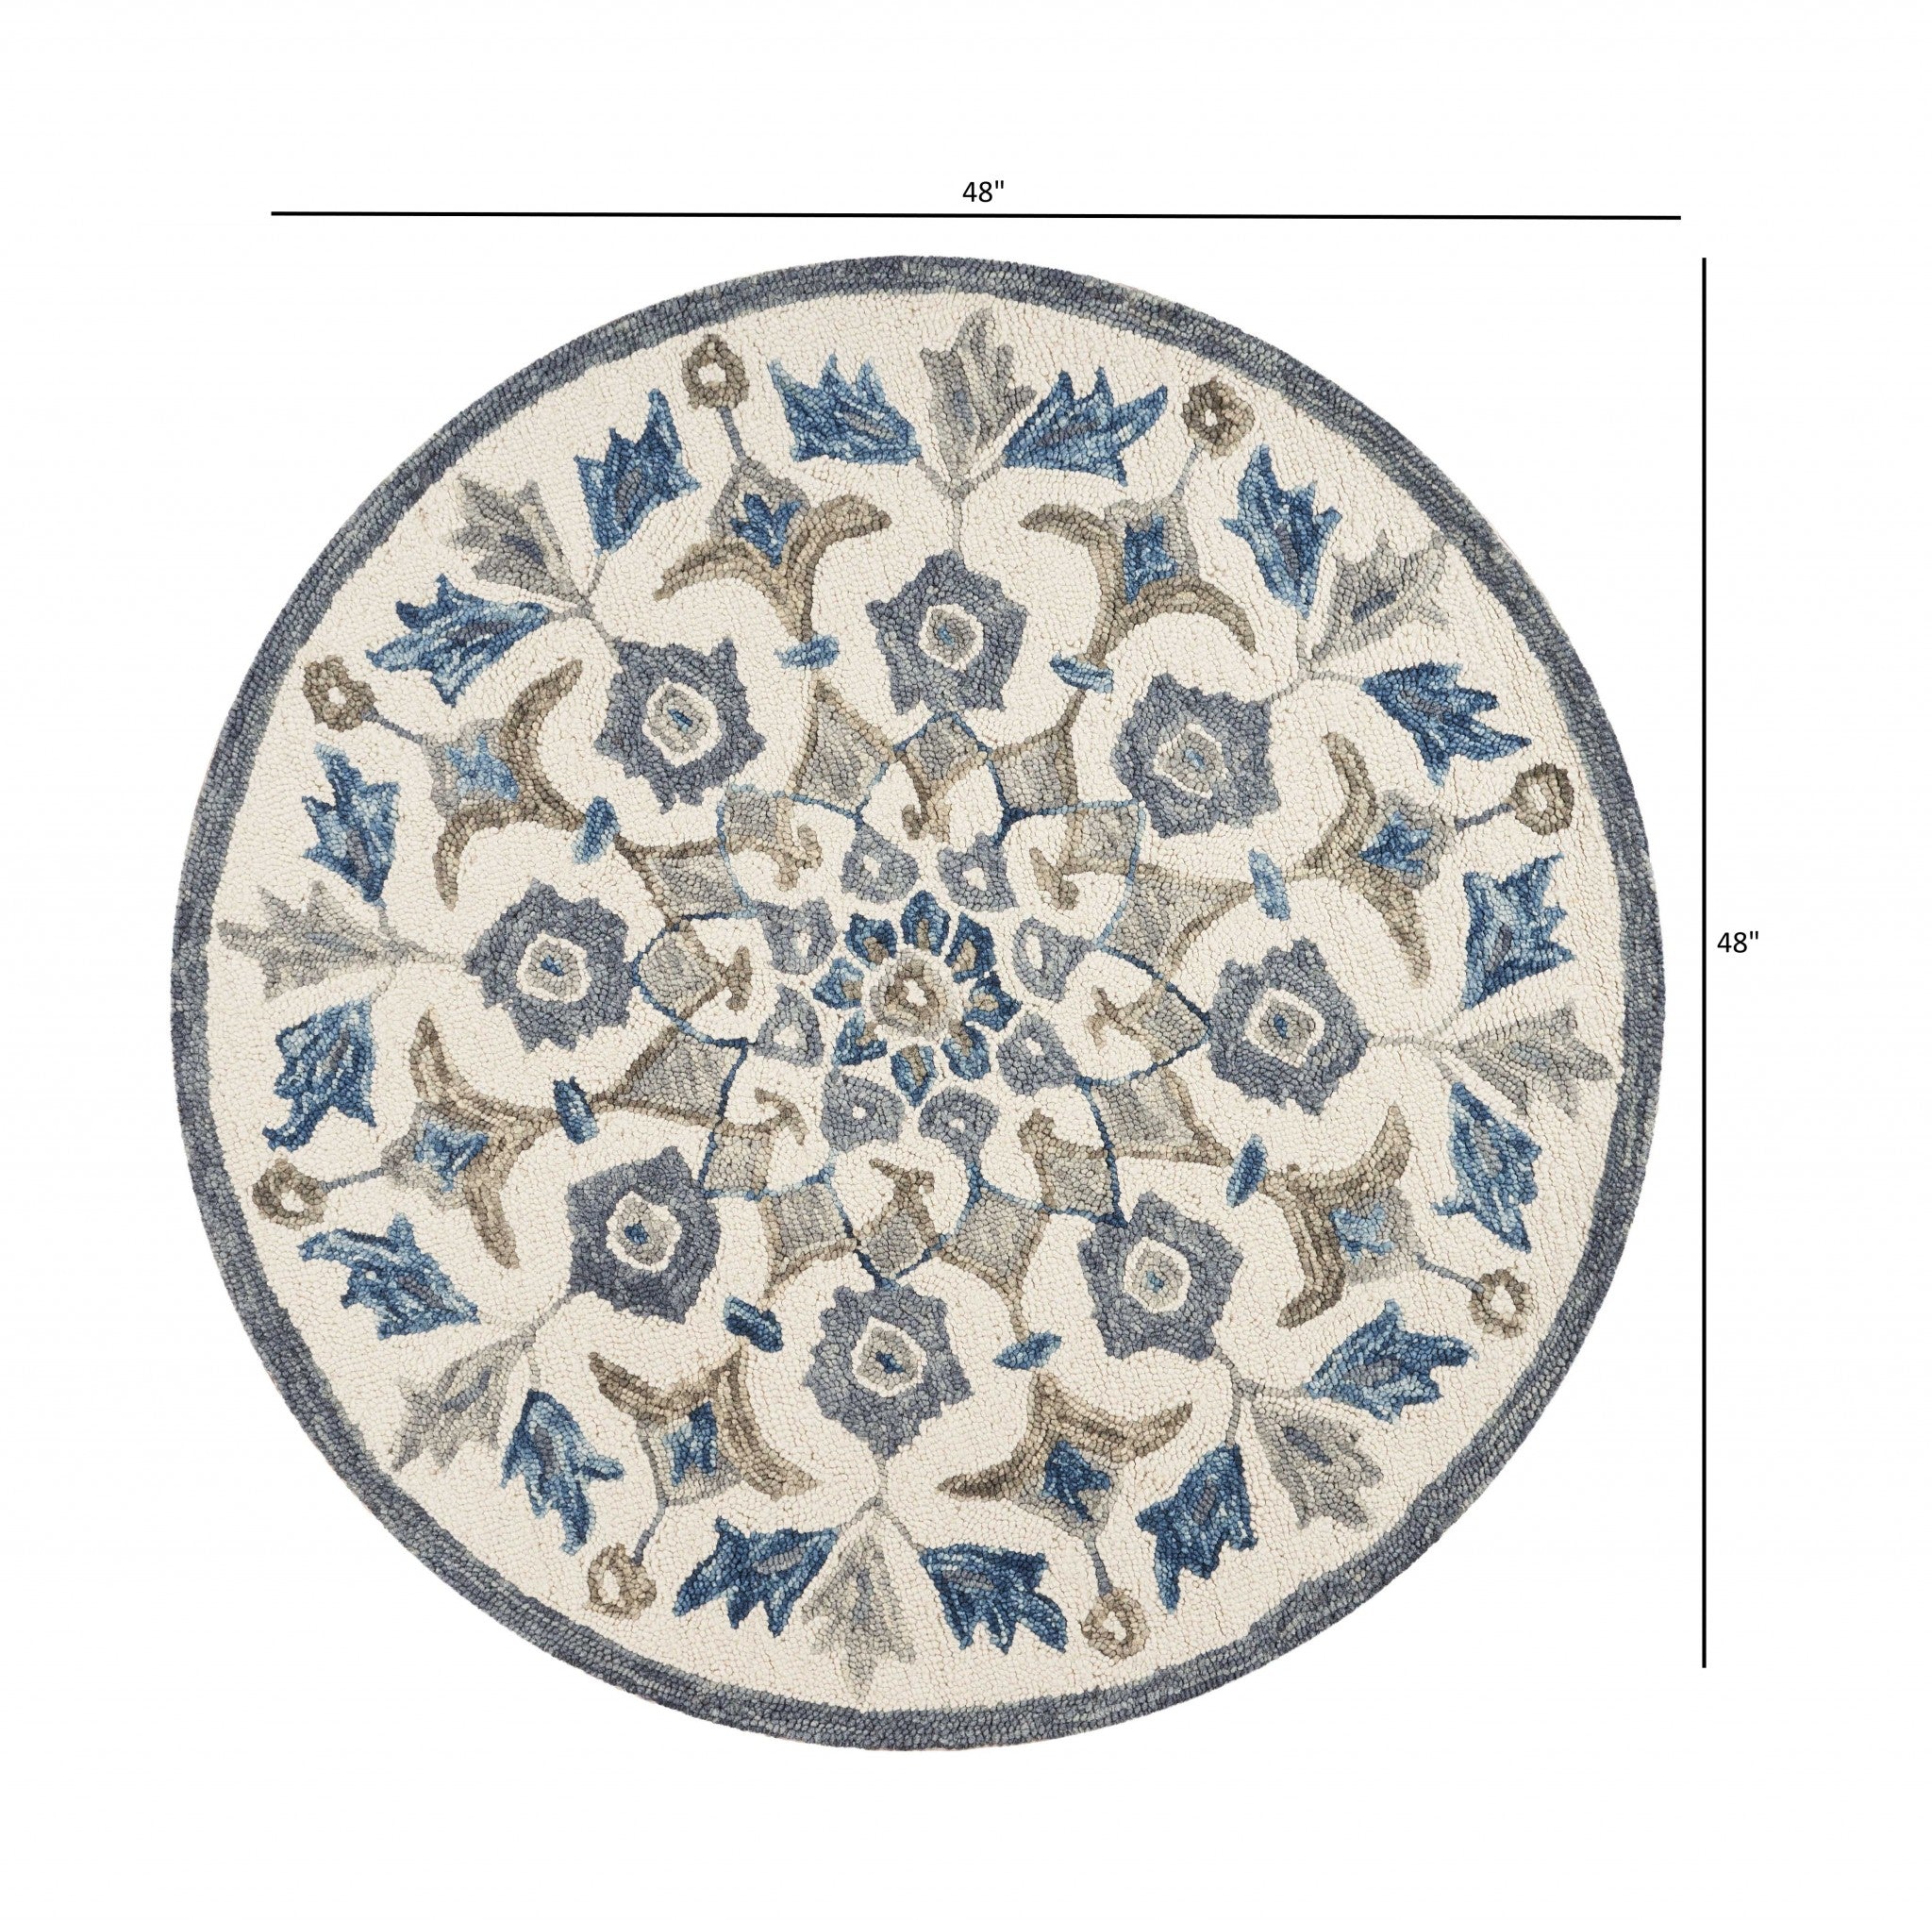 4’ Round Blue Floral Oasis Area Rug